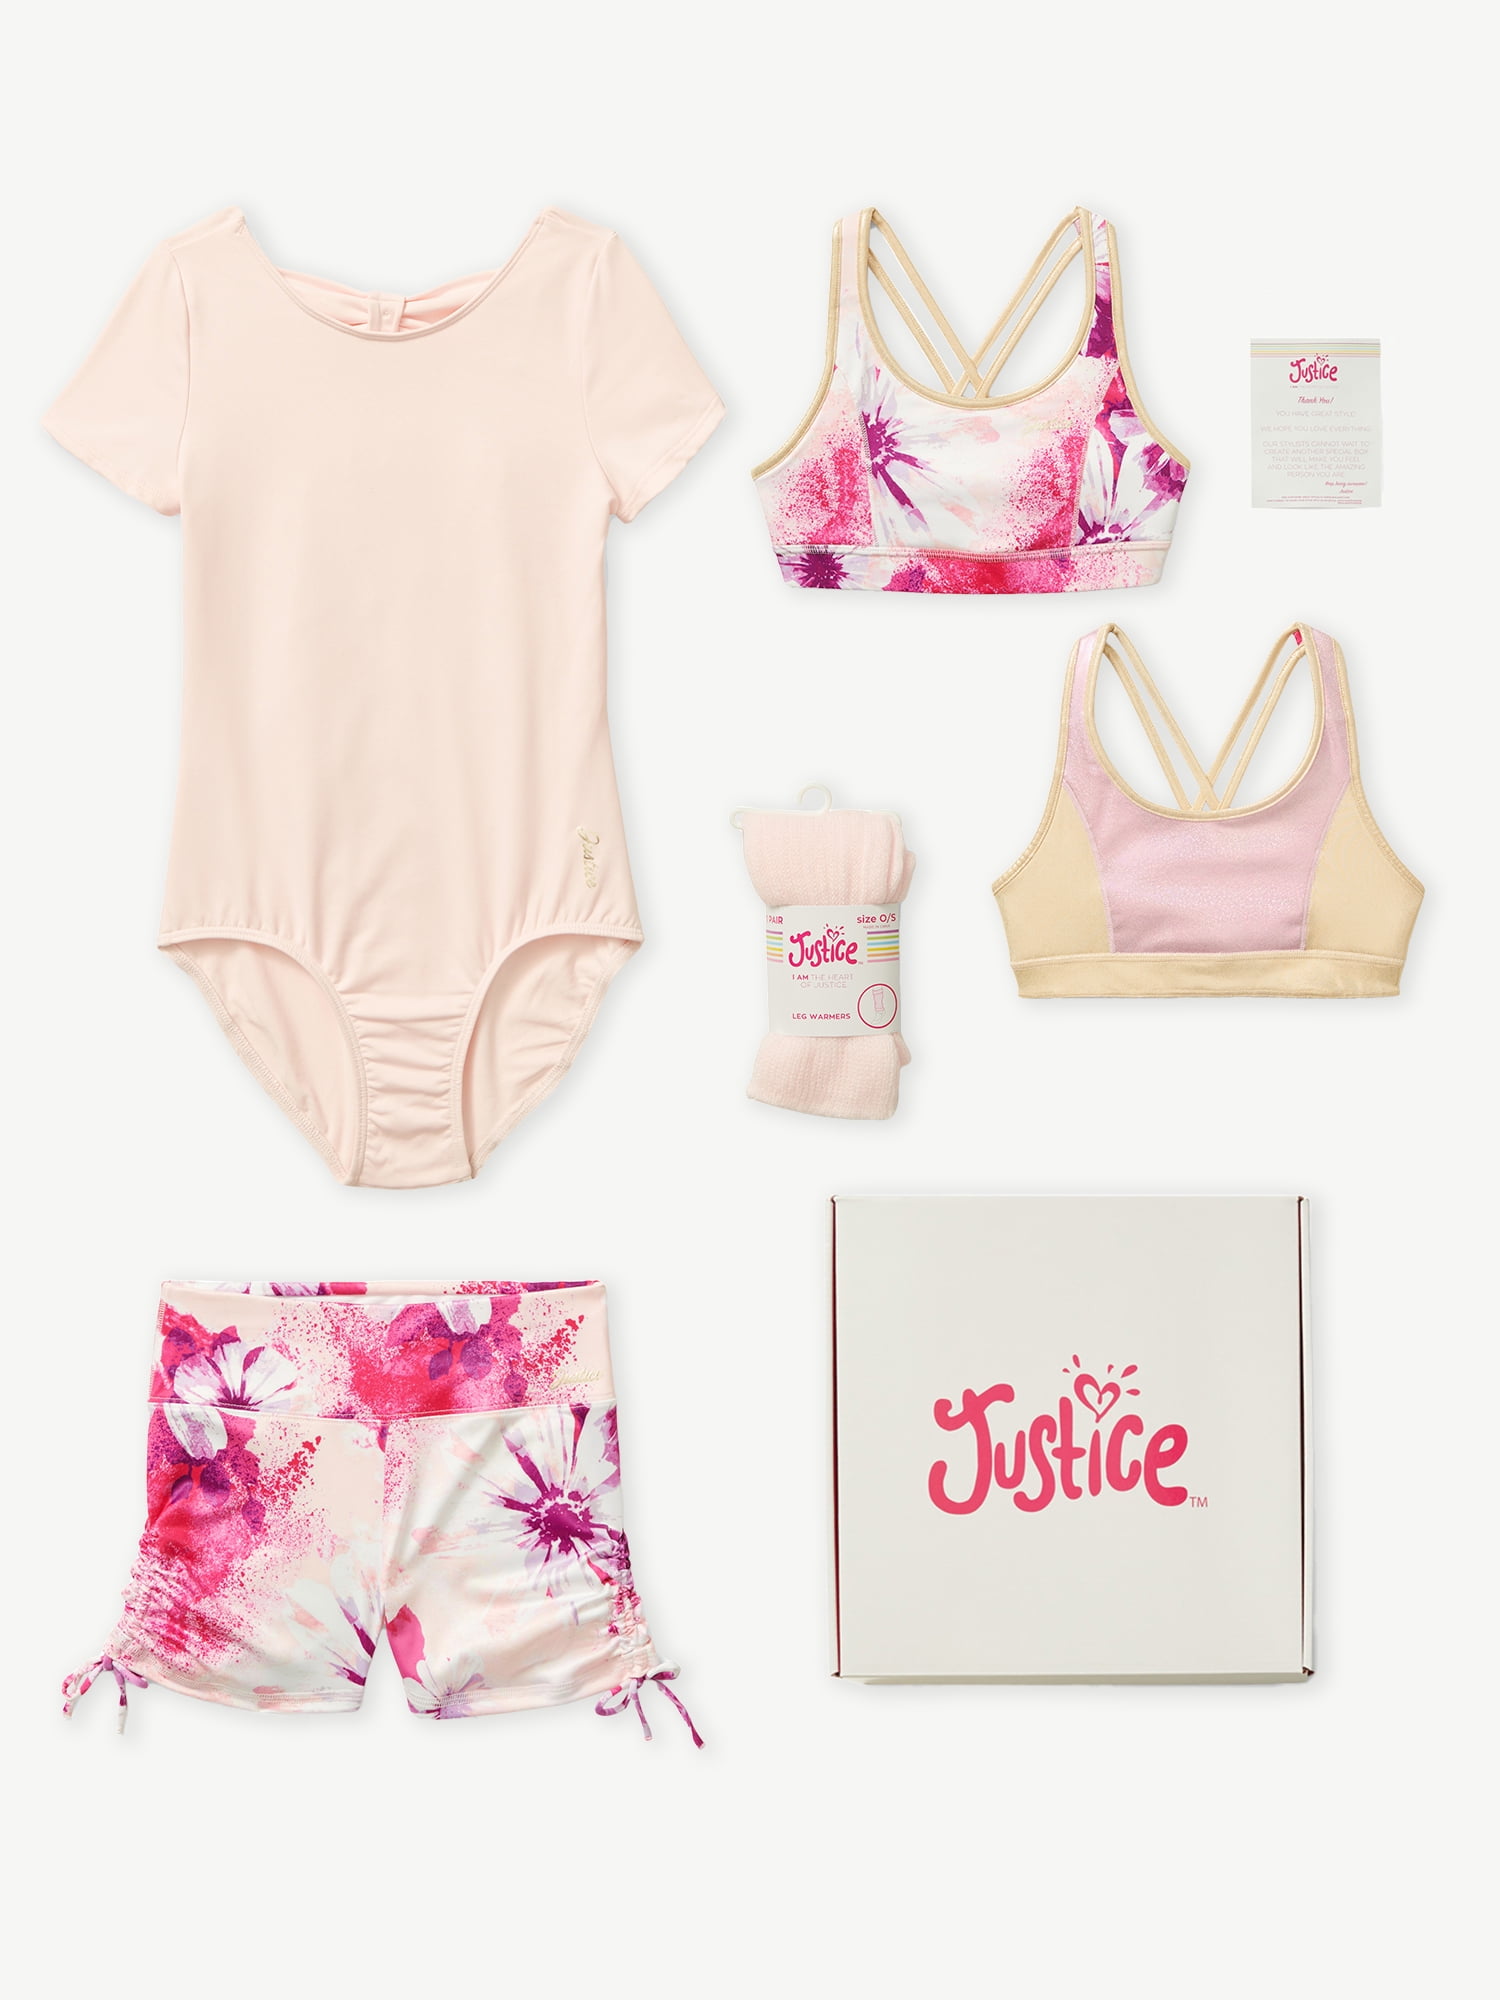 Justice Girls 5-Piece Jsport Gift Box Outfit Bundle with Short